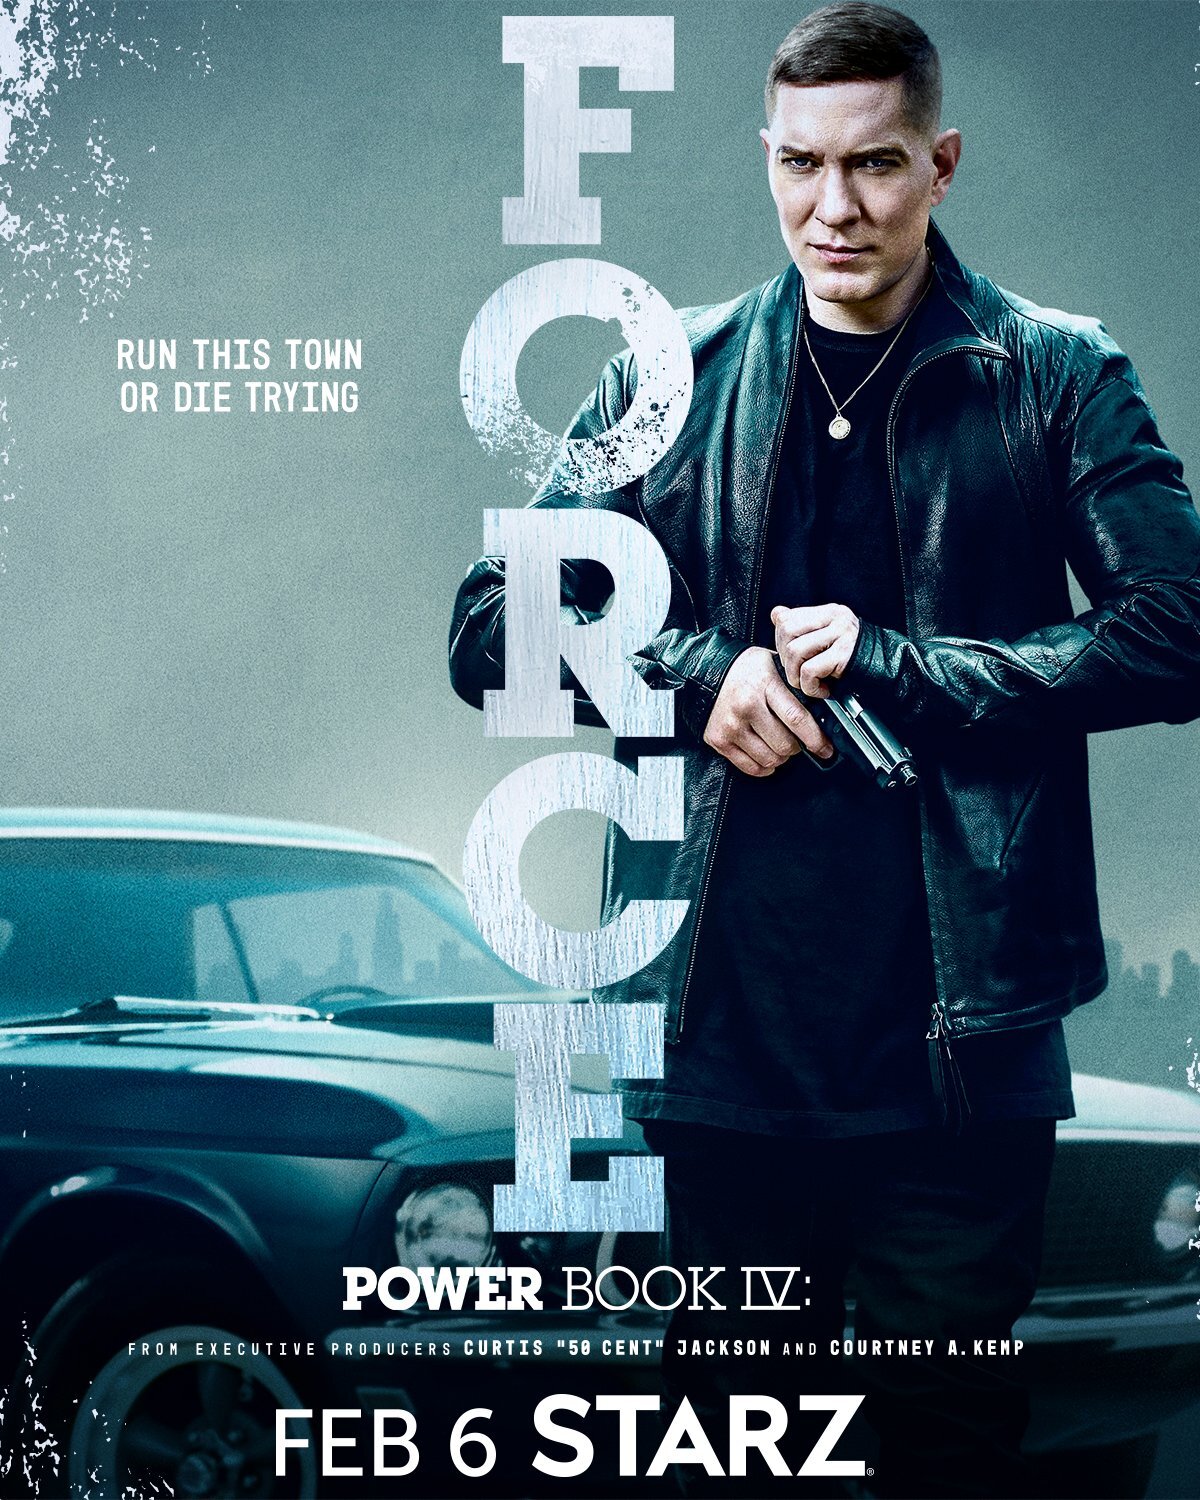 New Clip From Starz Original Series 'Power Book IV: Force' - Season 1, Episode 2